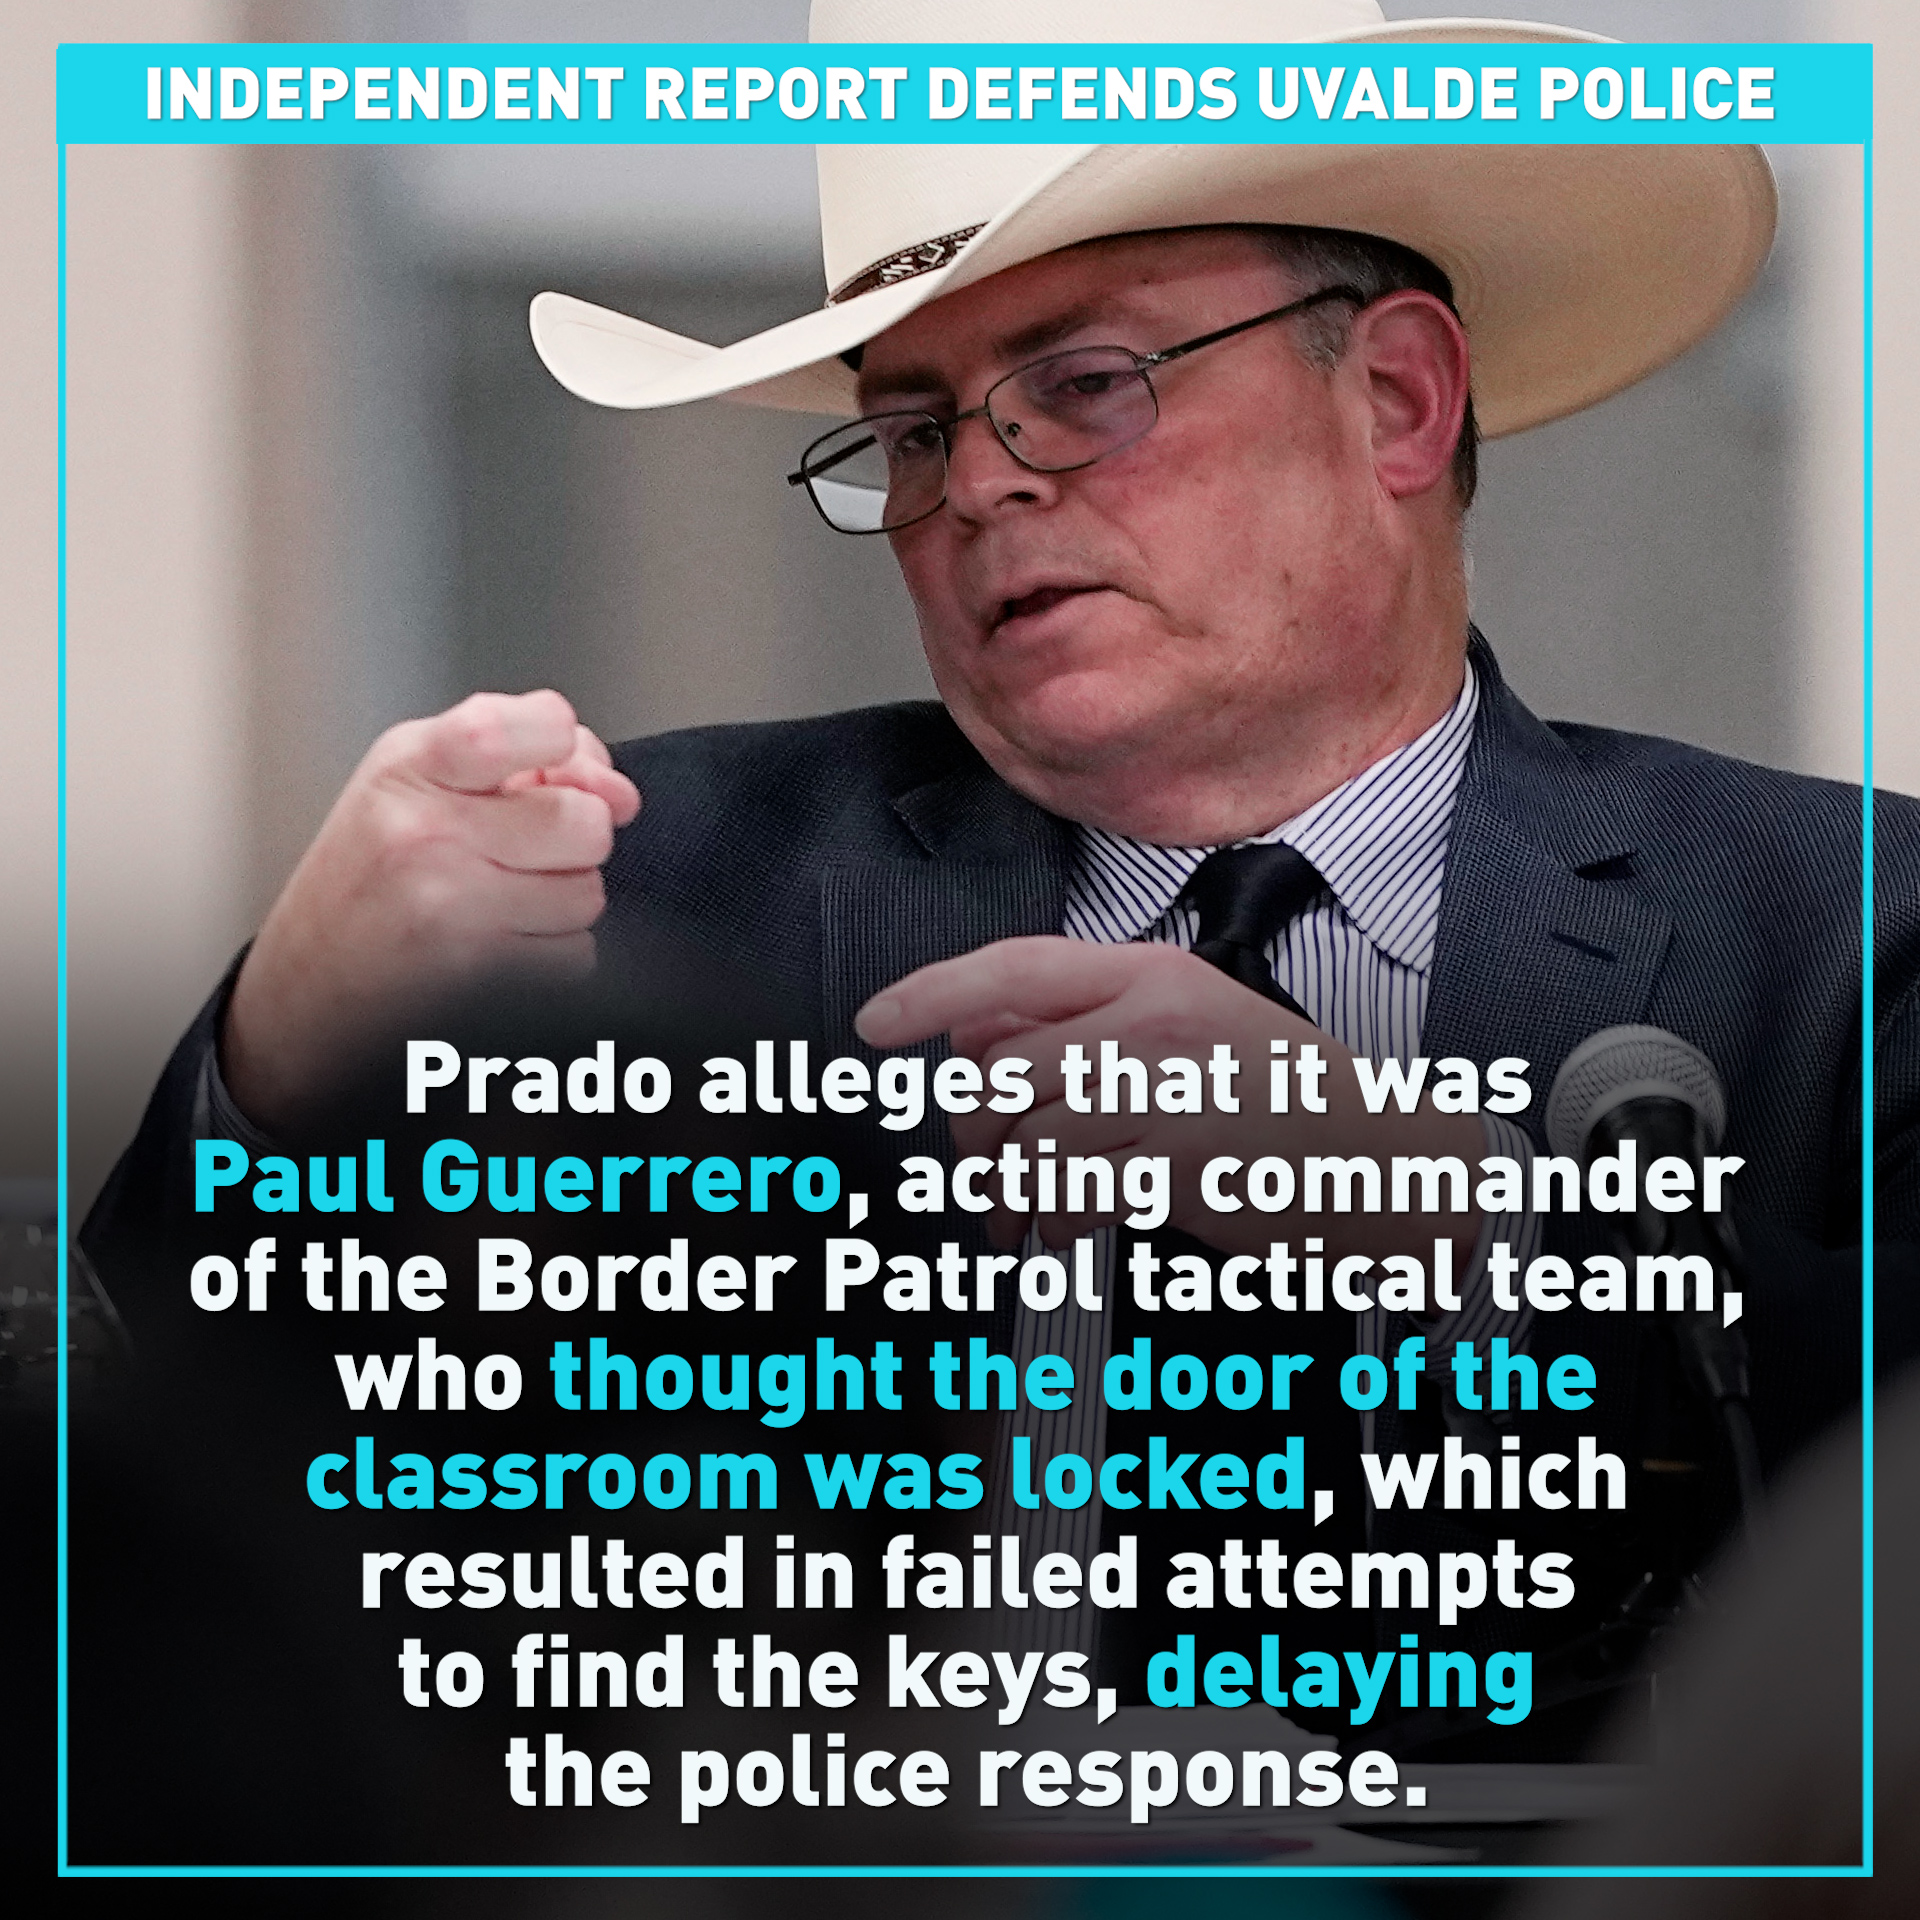 Independent report defends Uvalde police 2022 mass shooting response 